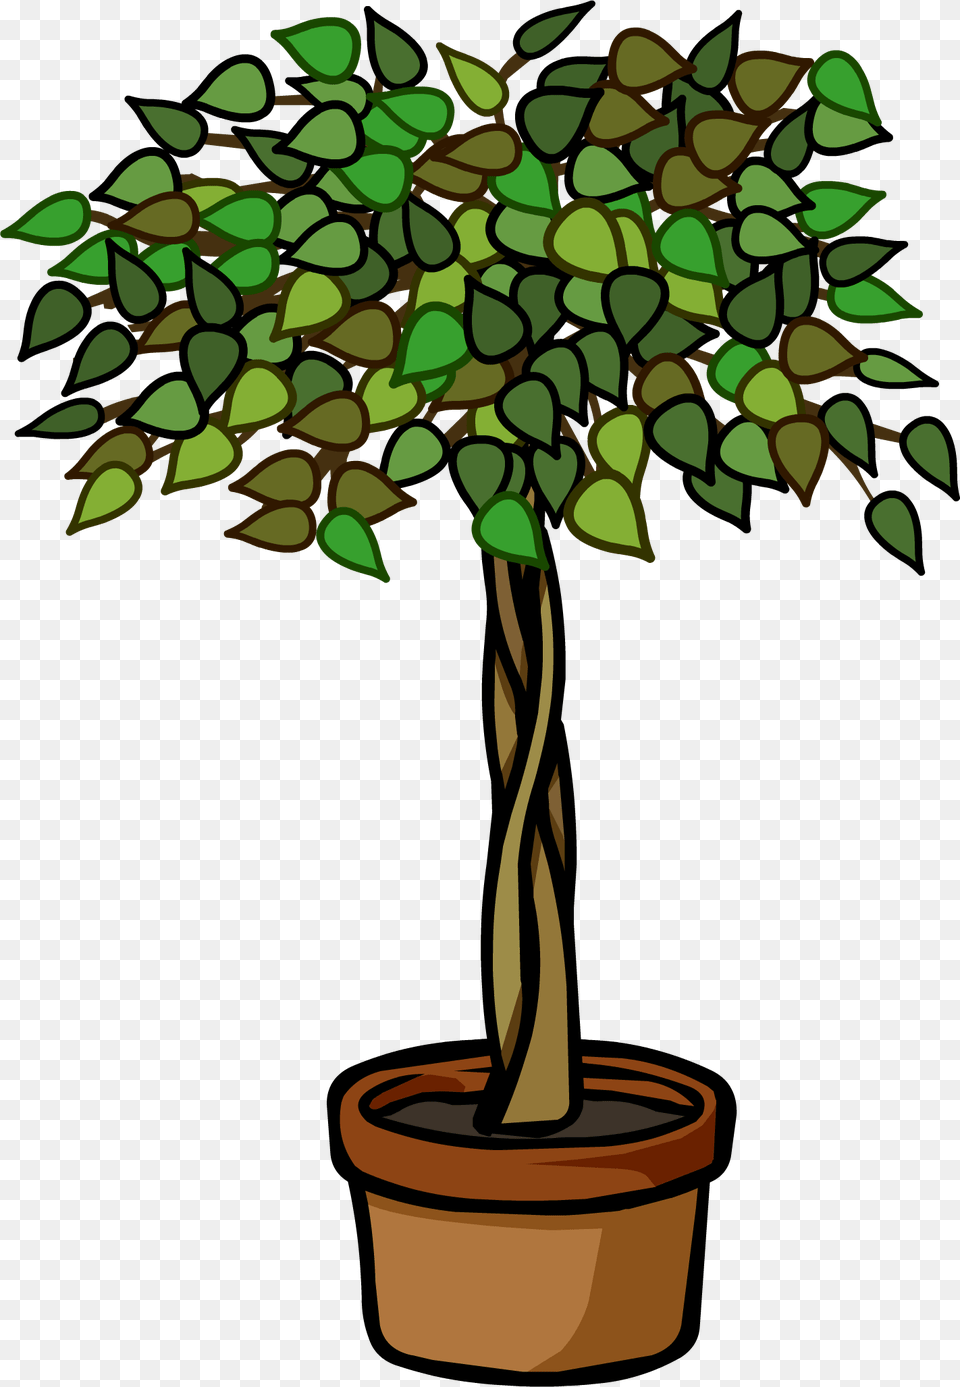 Ficus Plant Club Penguin Ficus, Potted Plant, Tree, Leaf Free Png Download